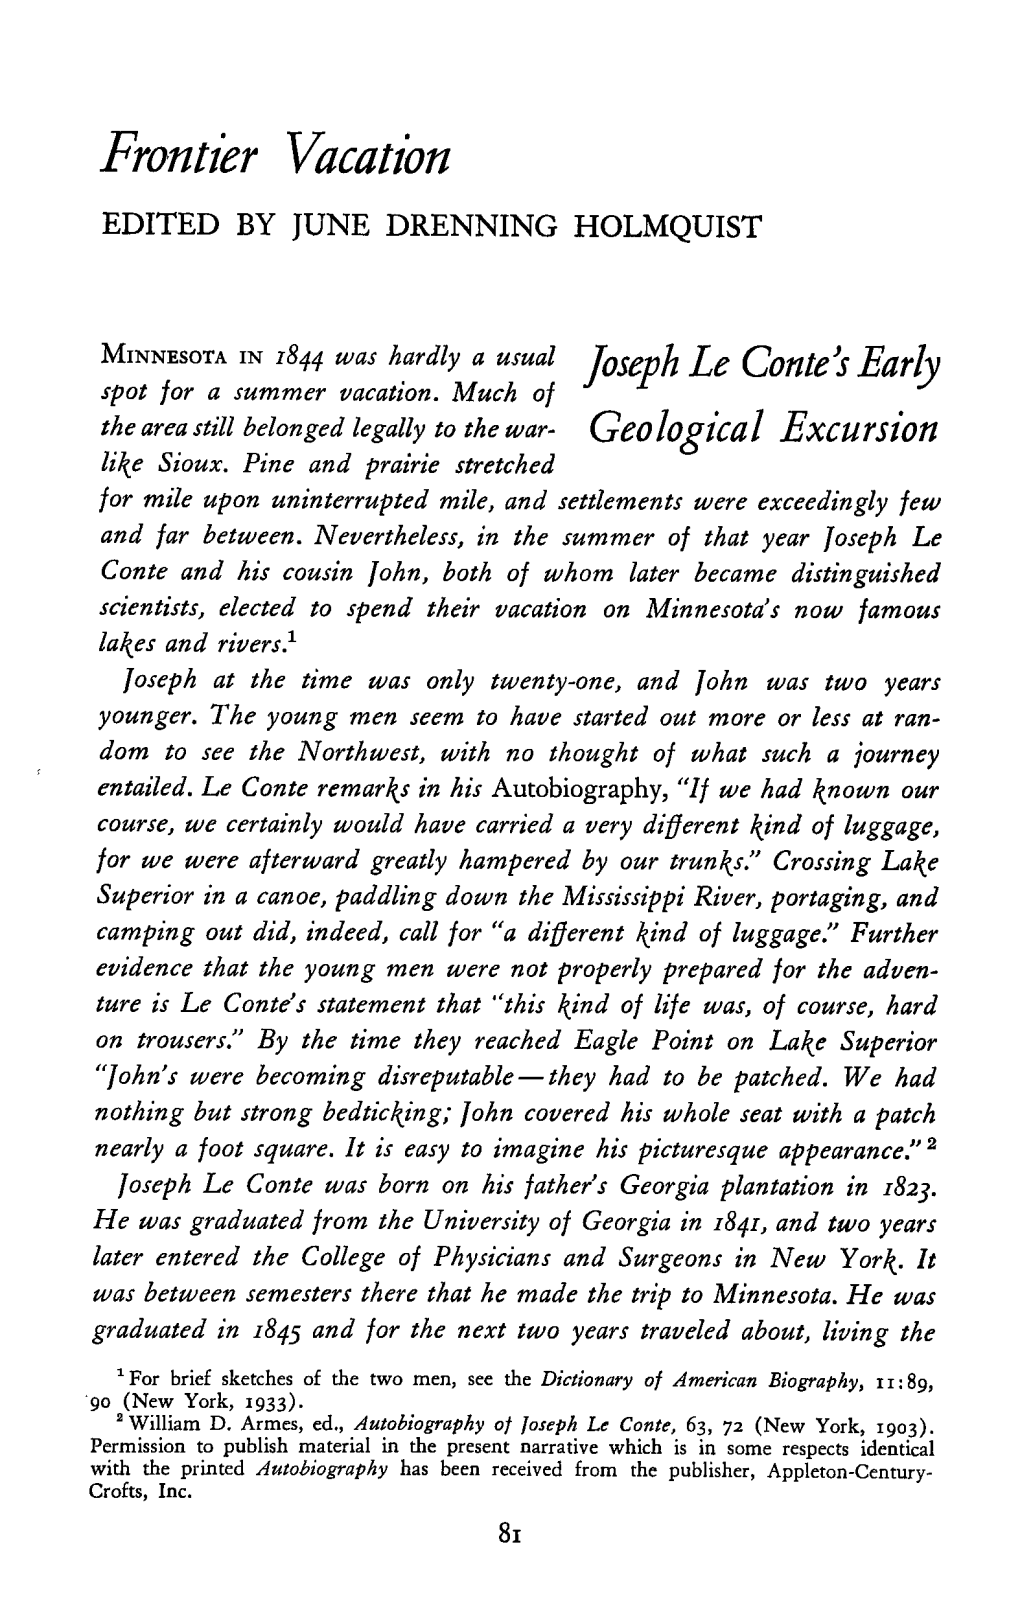 Joseph Leconte's Early Geological Excursion